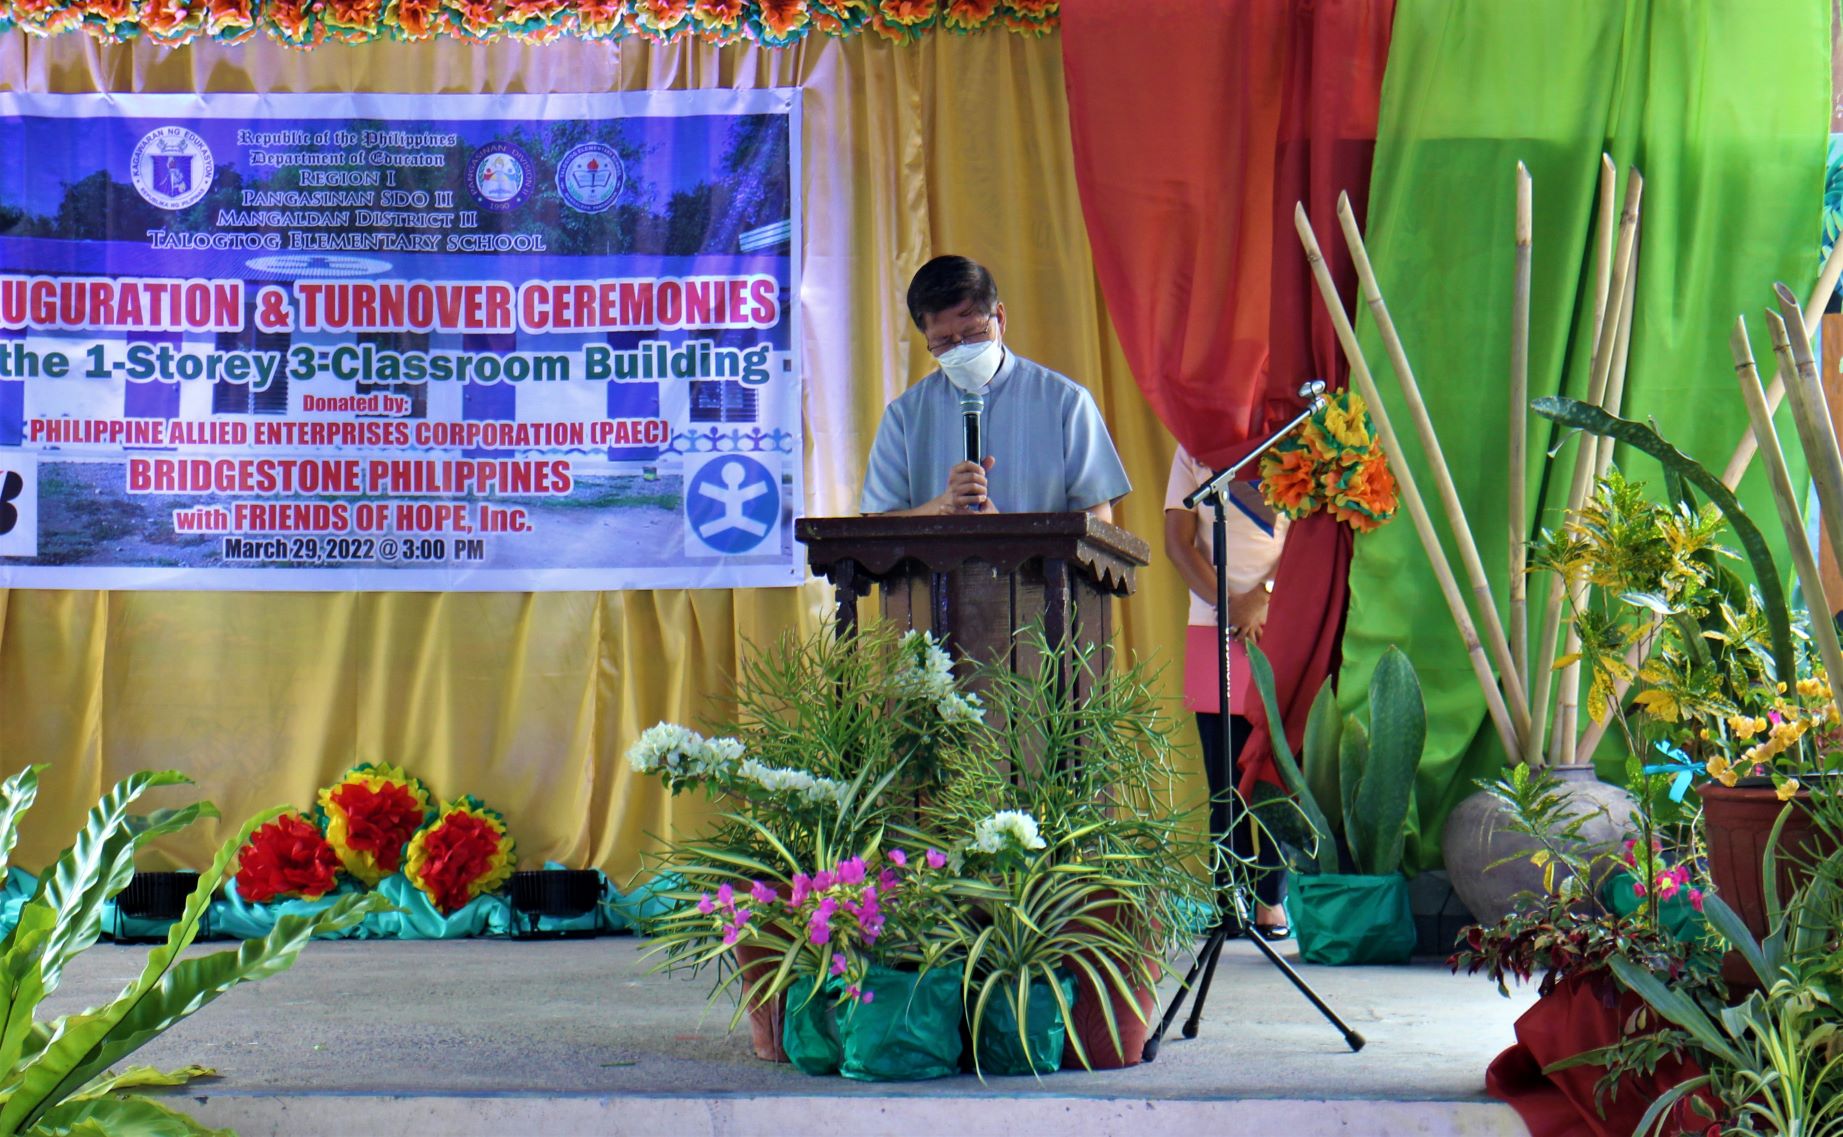 Rev. Fr. Jose Laforteza gave the invocation after the requisite playing of various hymns.